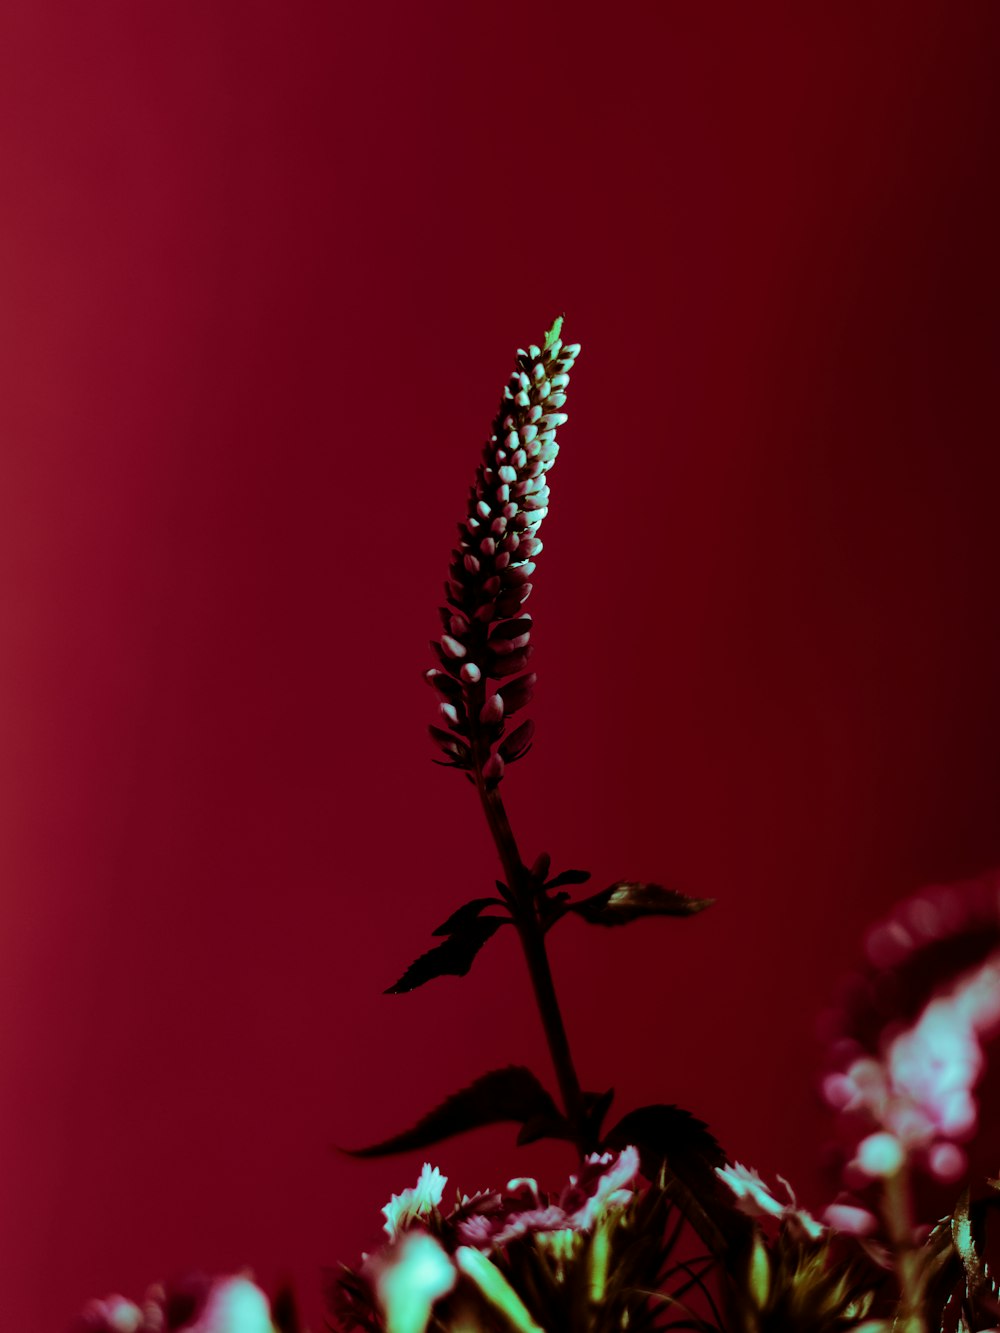 a close up of a flower with a red background